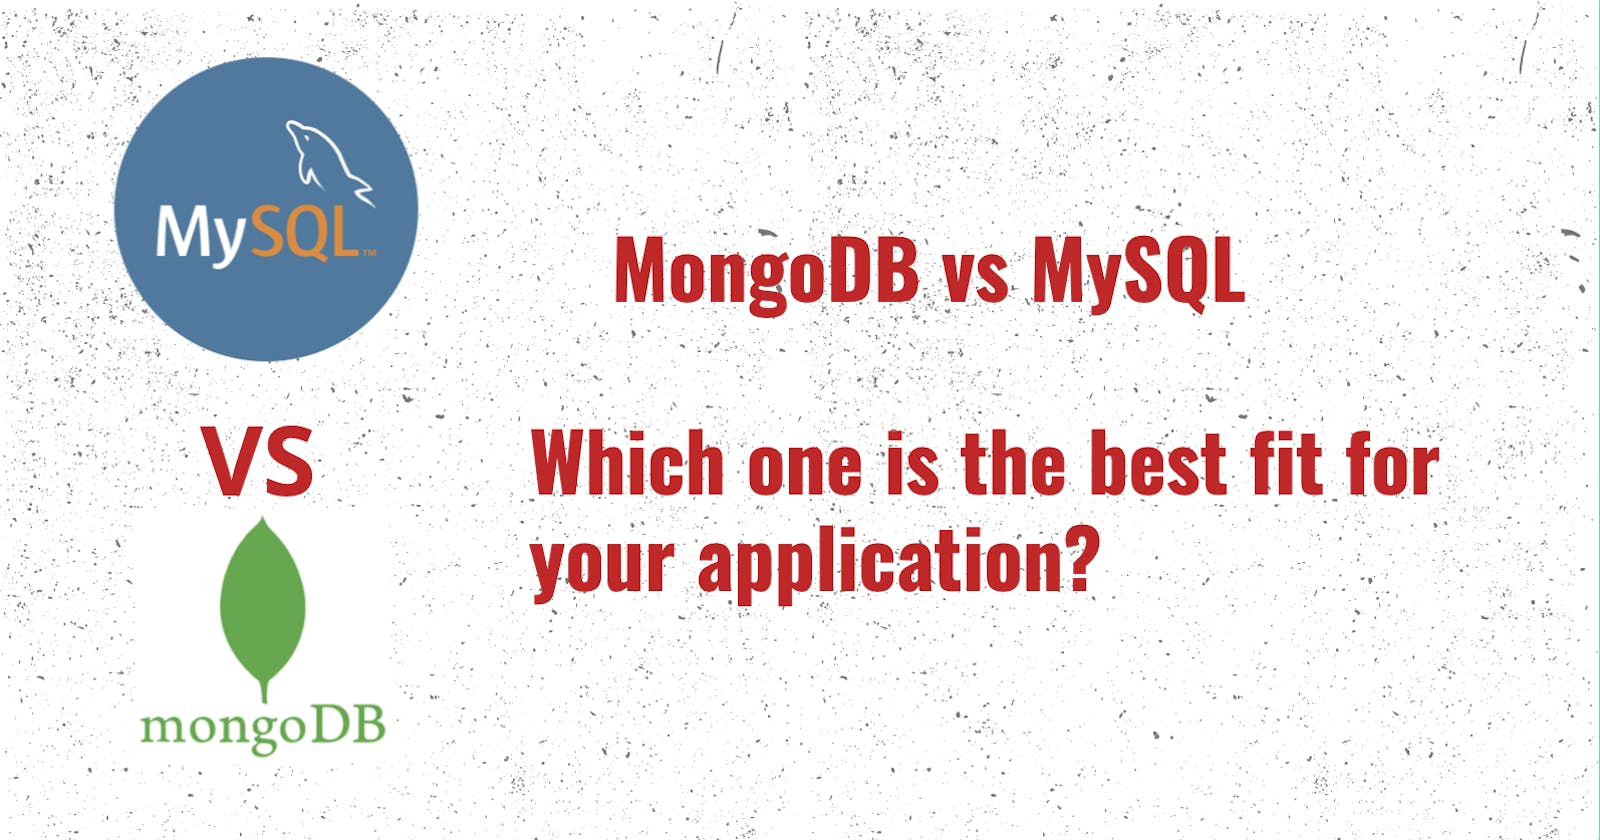 MongoDB vs MySQL: Which one is the best fit for your application?